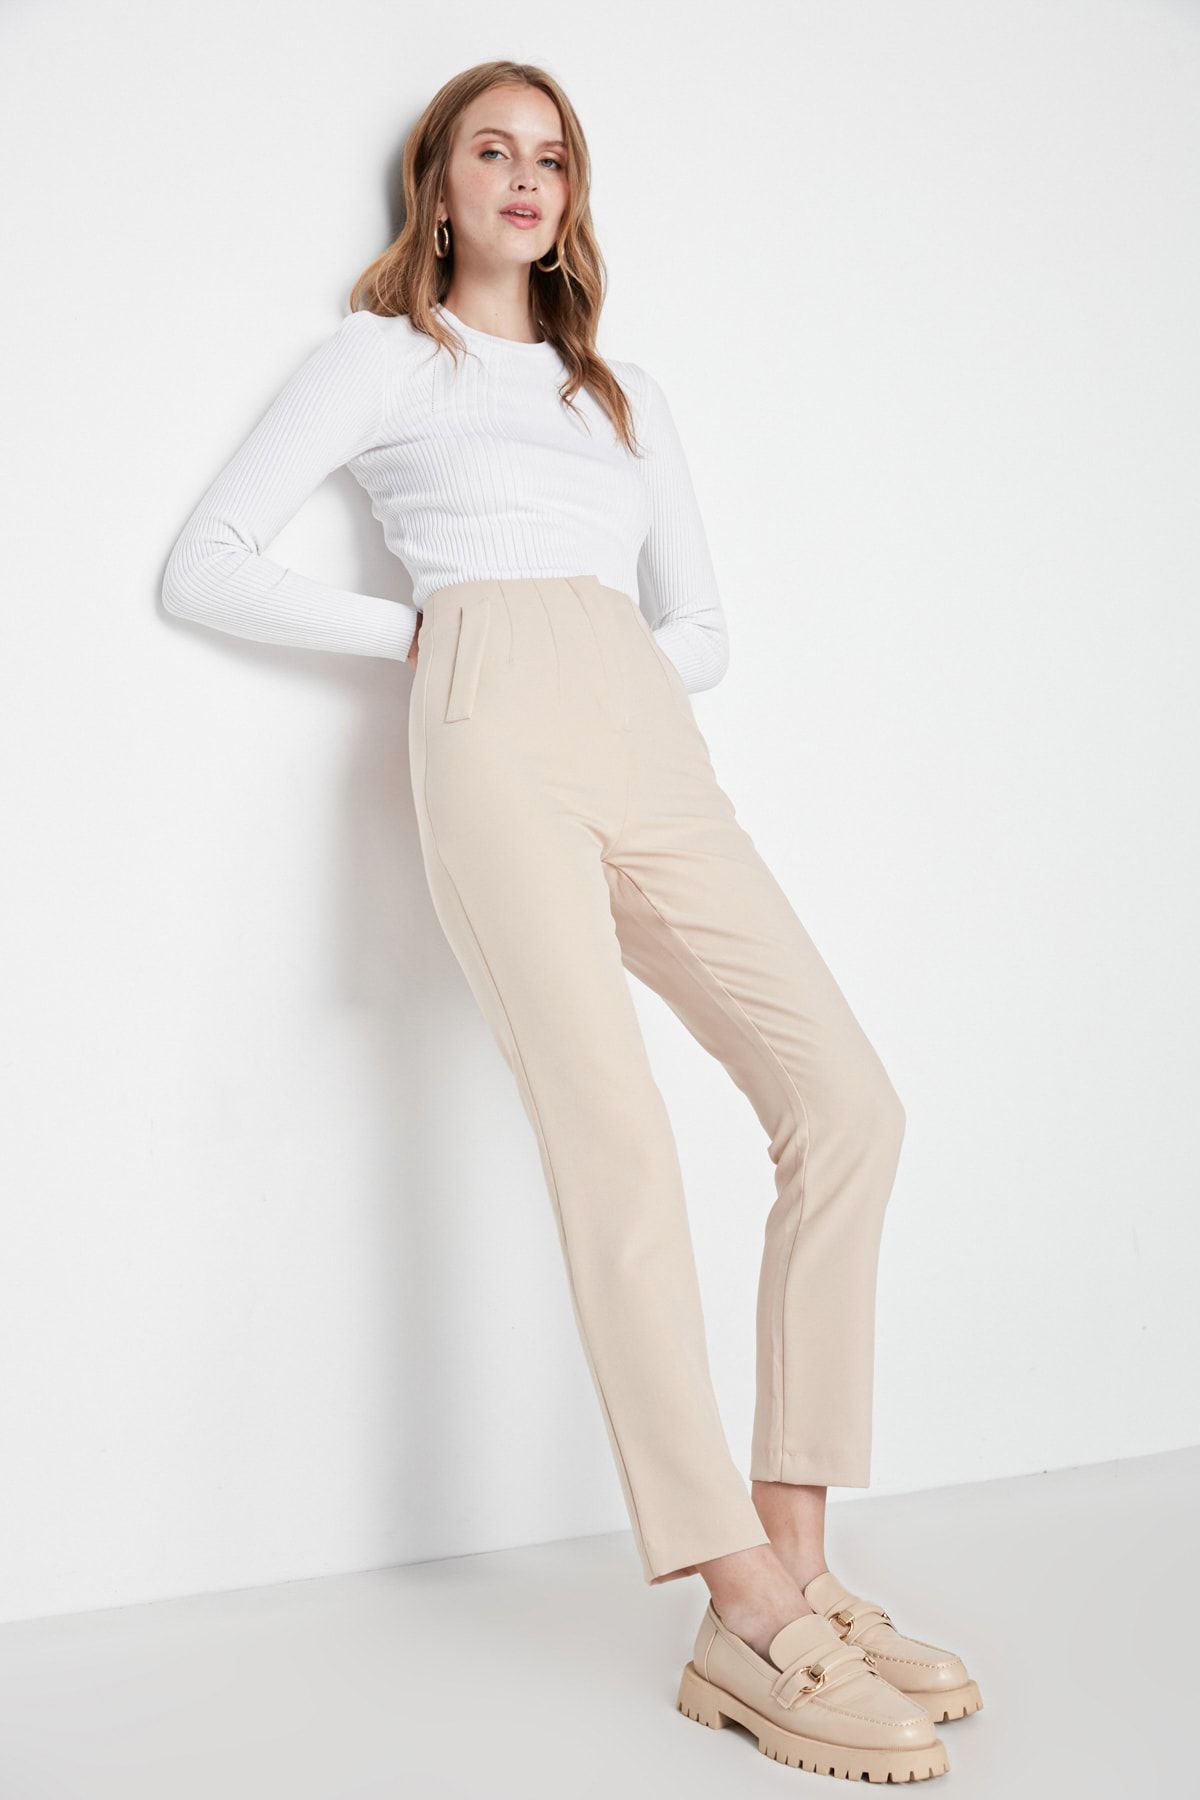 Discount Tadkaa India Limtied | United Colors of Benetton Women Regular Fit  Solid Parallel Trousers